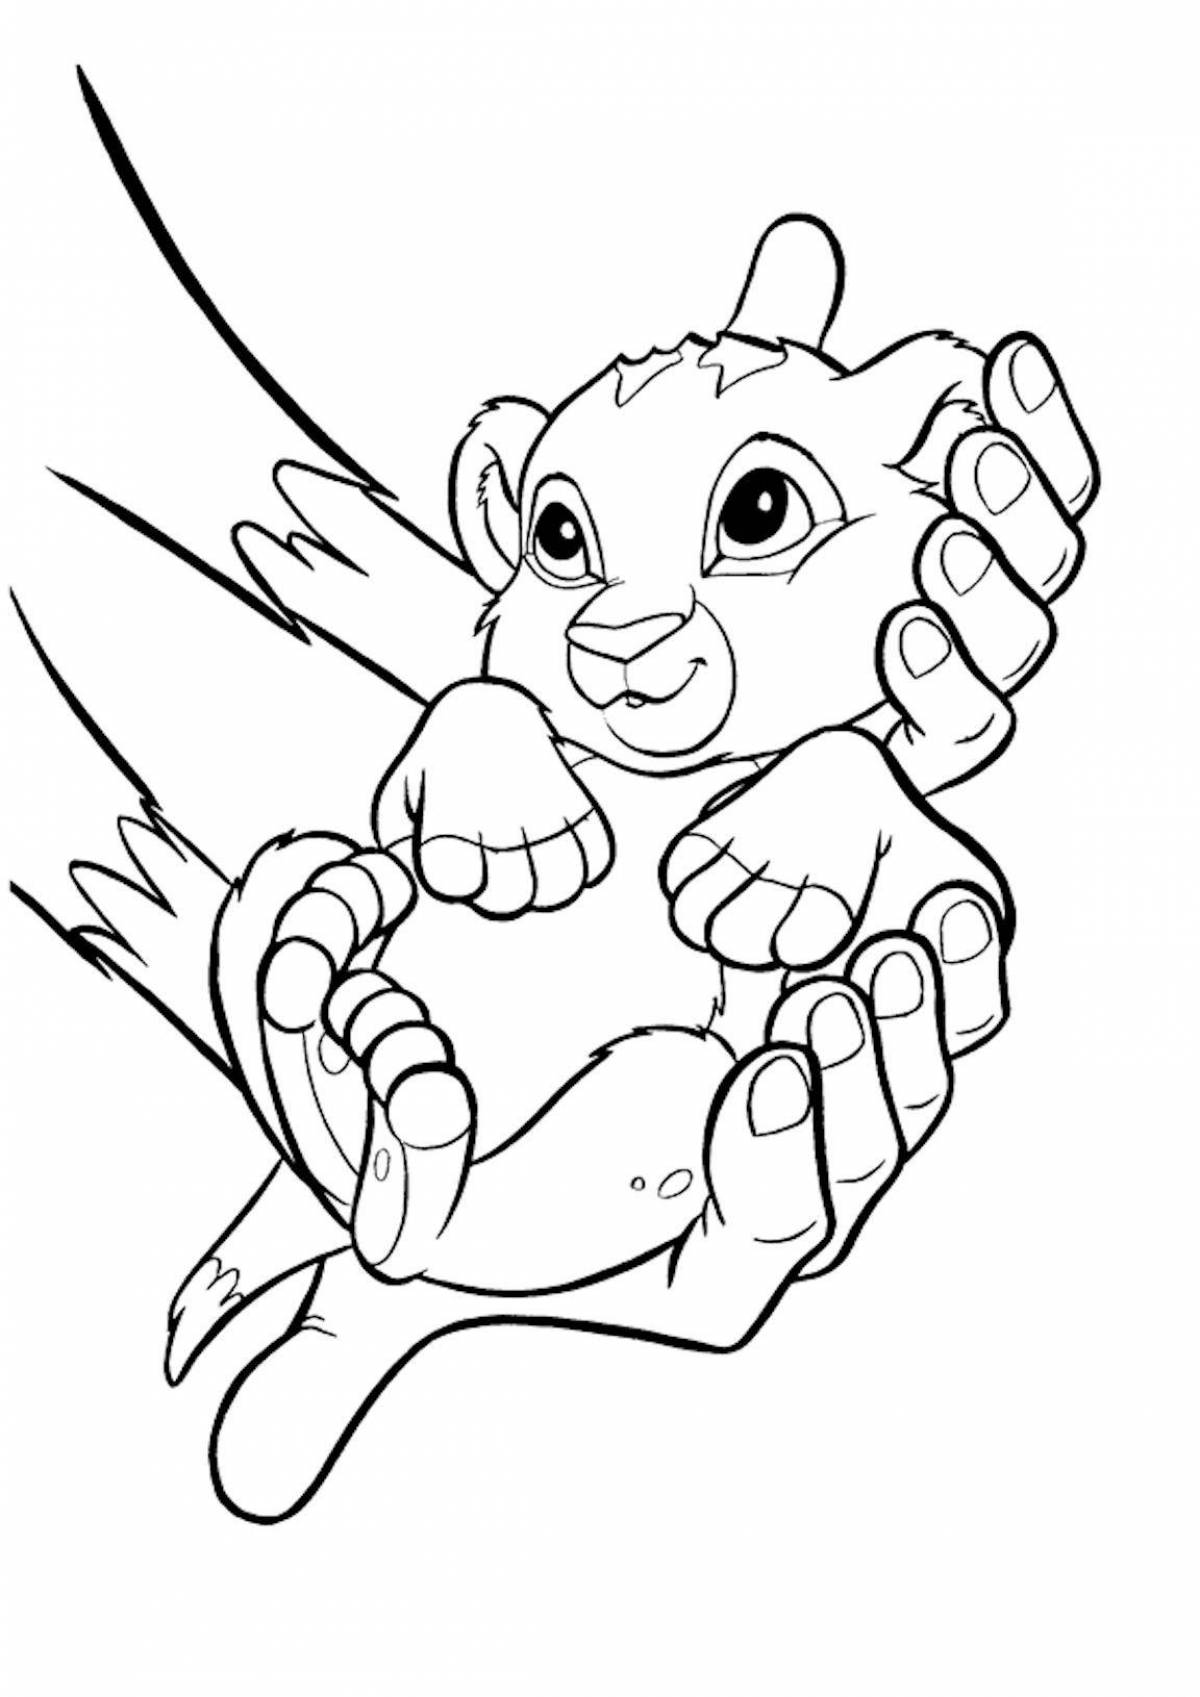 Simba bright coloring for kids